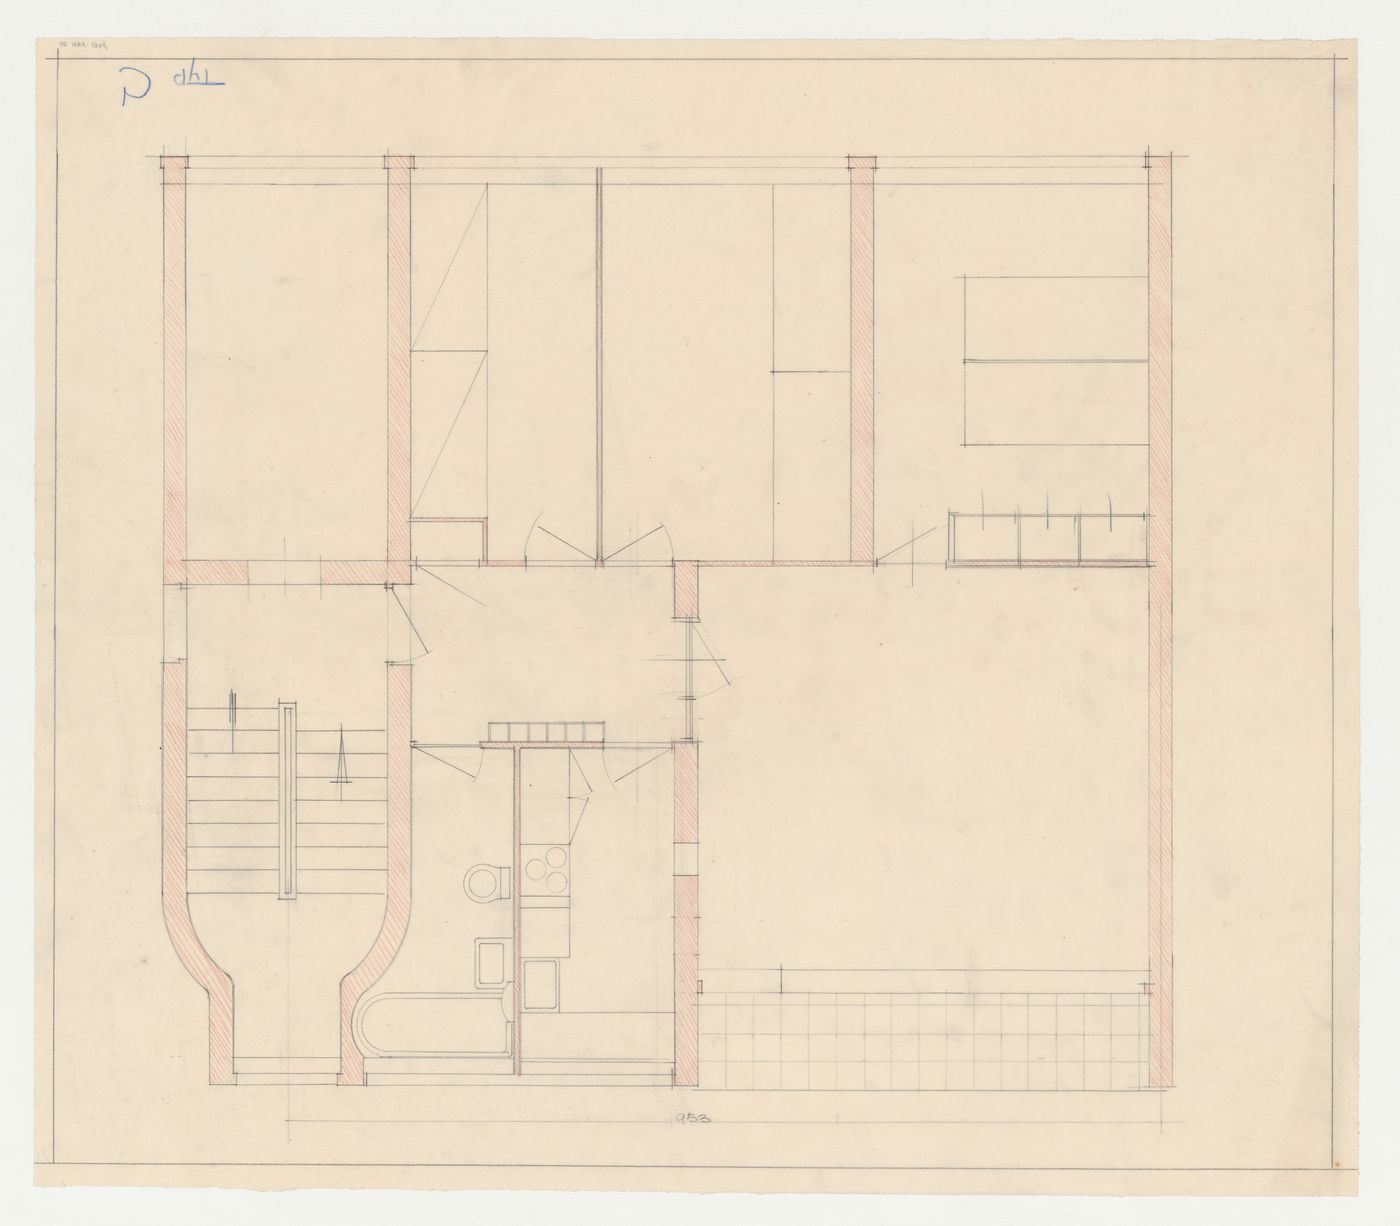 Plan for a type C housing unit, probably for Hellerhof, Frankfurt am Main, Germany